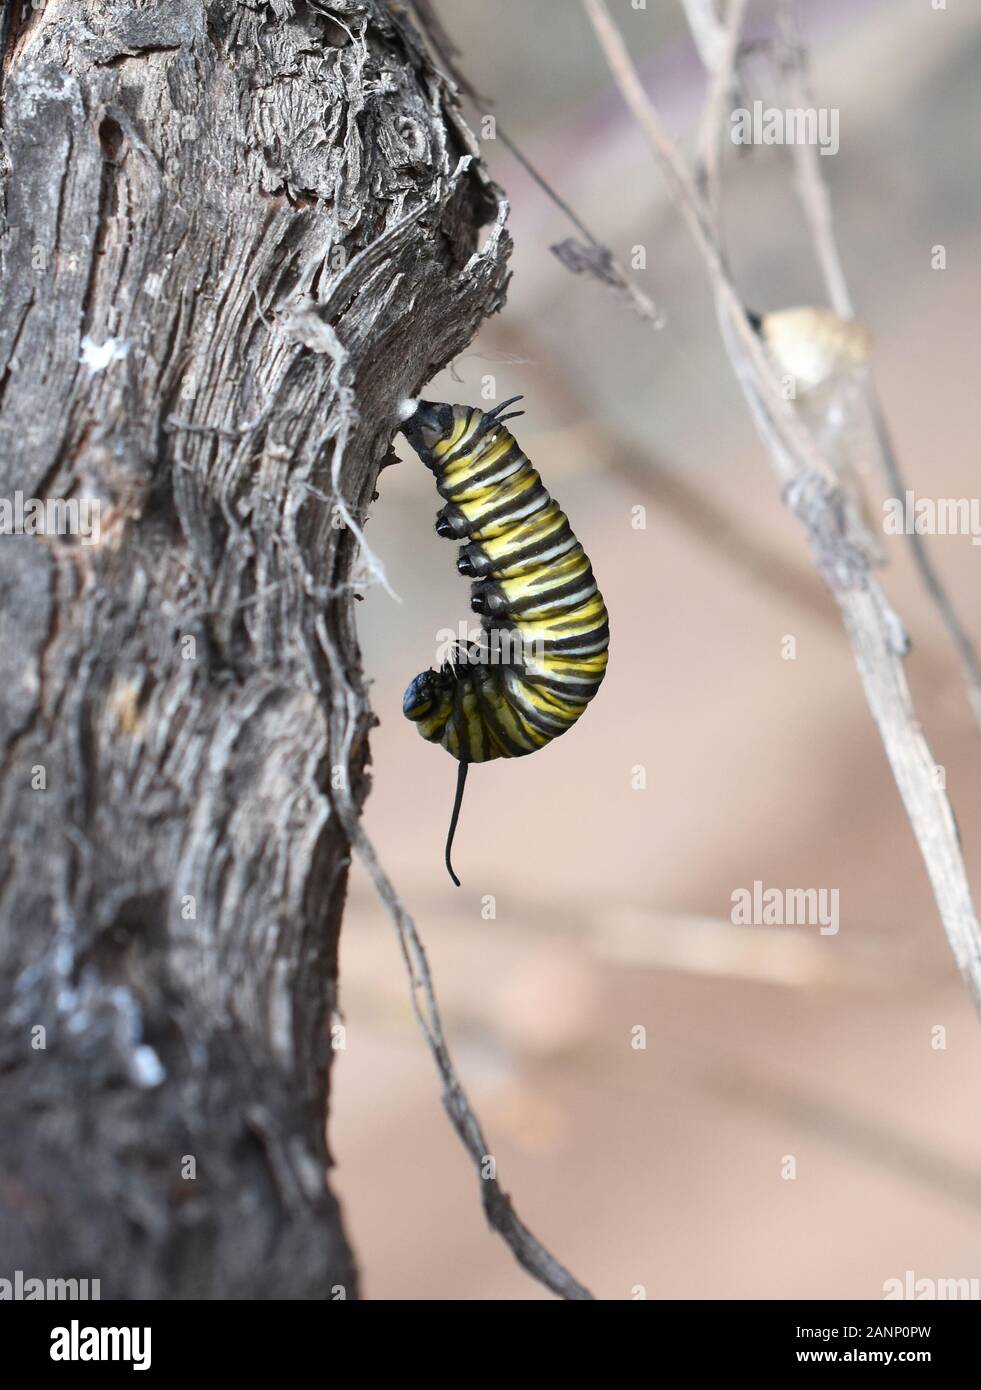 Monarch butterfly caterpillar hanging from a twig ready to pupate Stock Photo